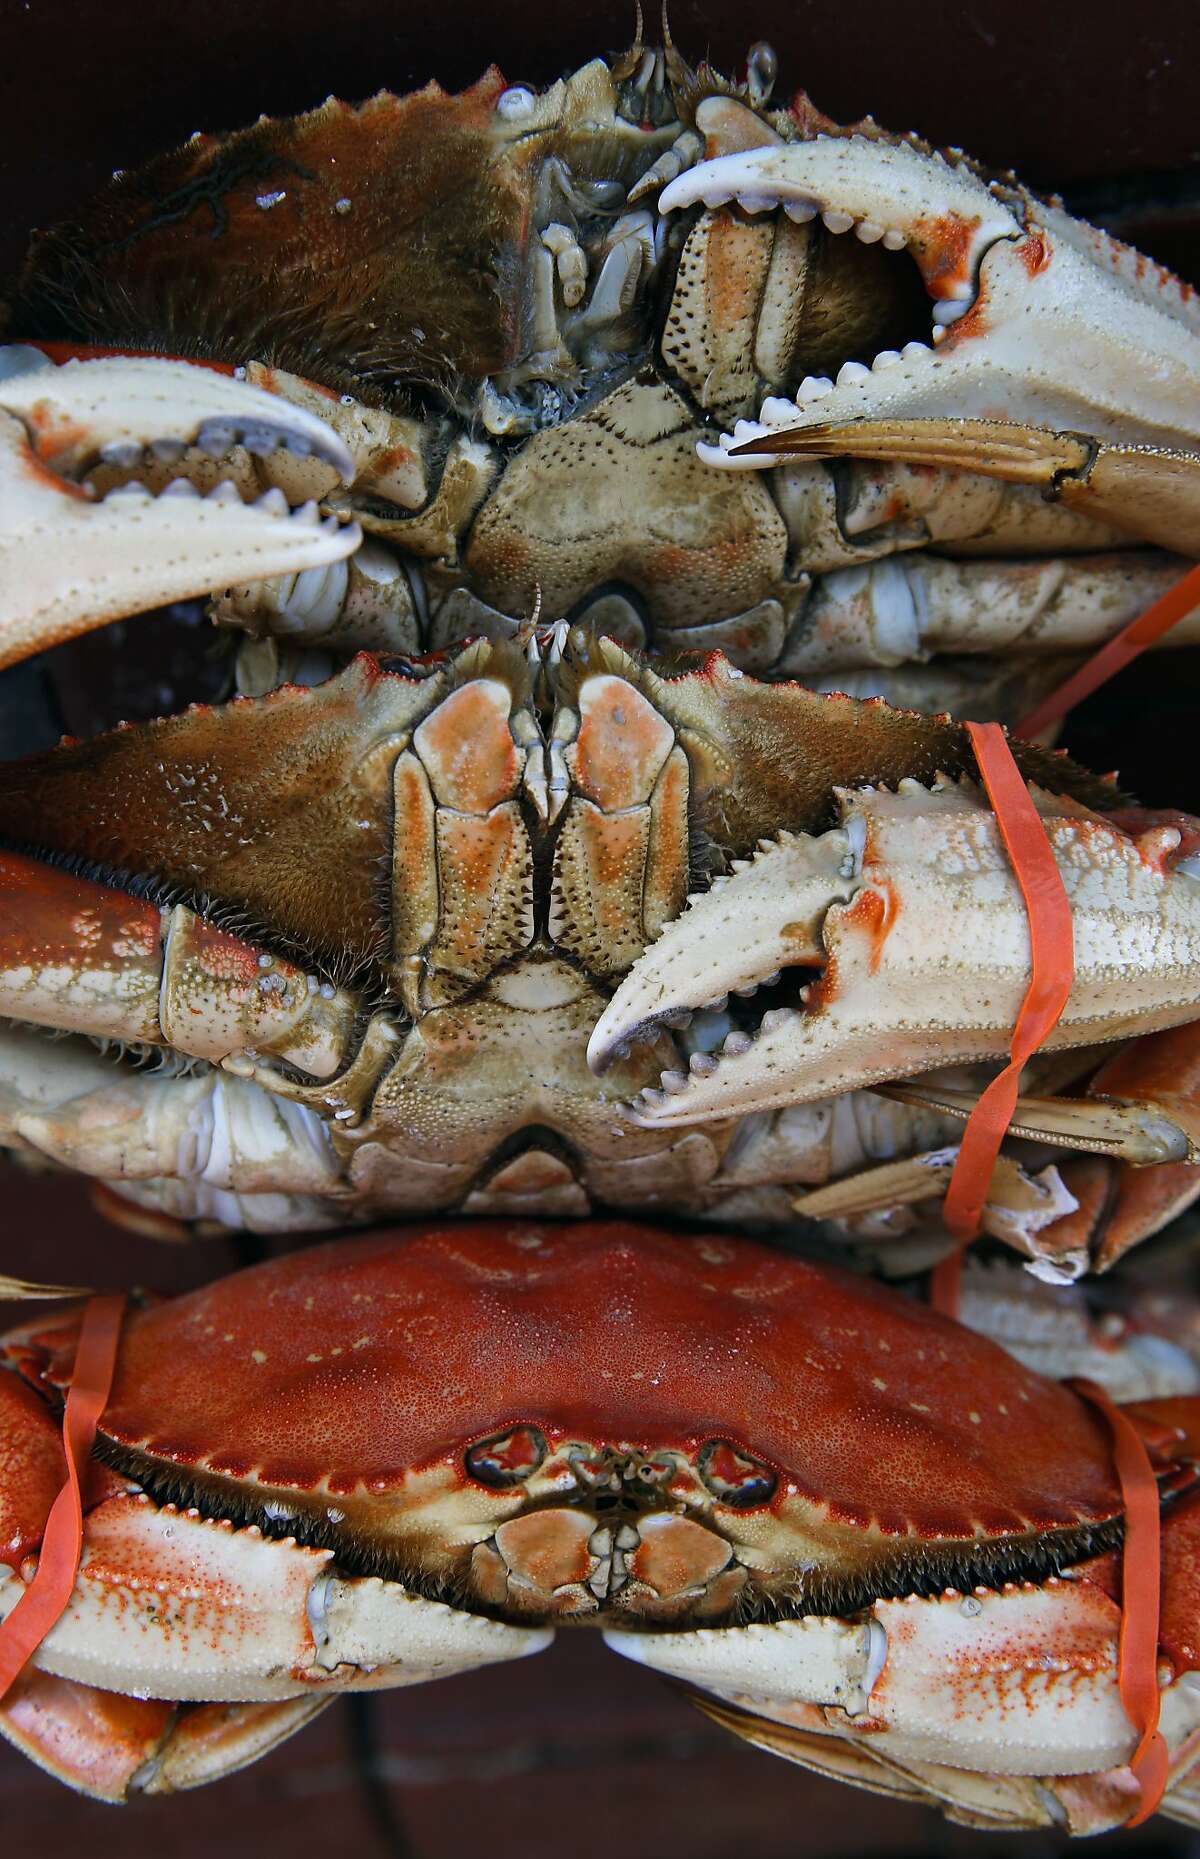 Dungeness crab from Washington state is cooked and up for sale along Fisherman's Wharf in San Francisco, Calif. on Thursday December 31, 2015, as California's commercial crab season remains closed after a neurotoxin was found in local Dungeness crab earlier this year.